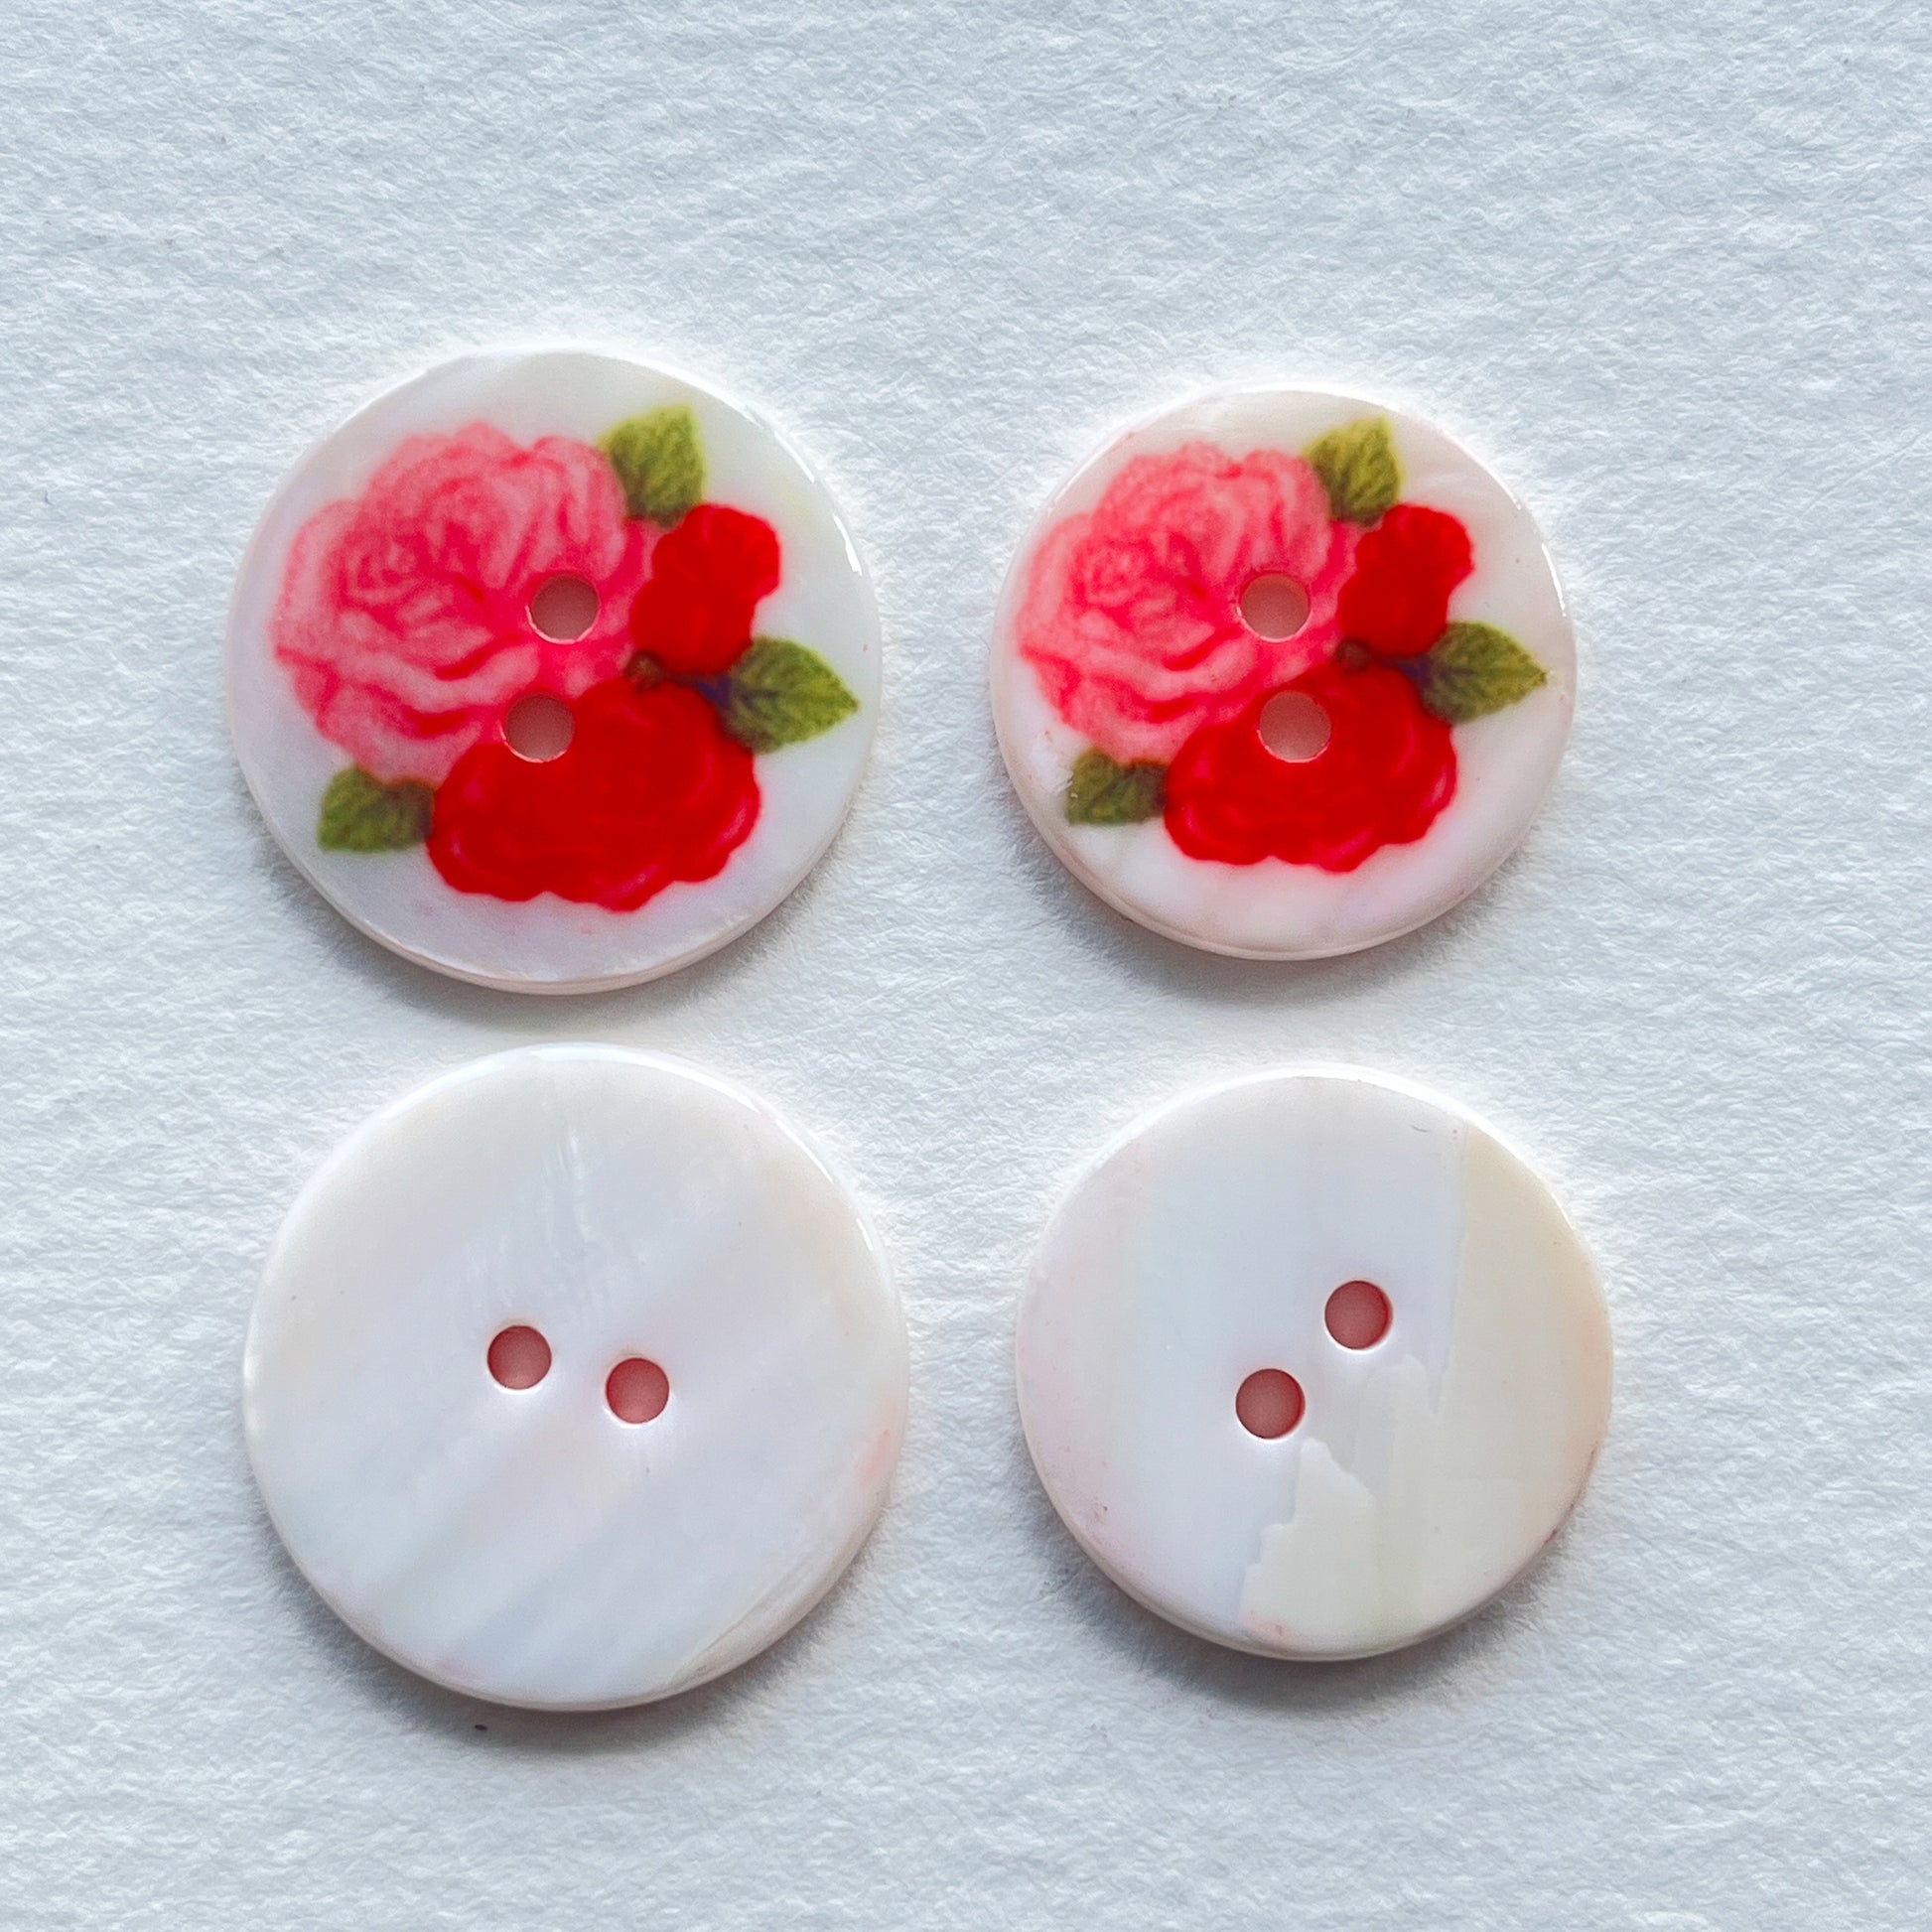 pretty lacquered Agoya shell buttons with flower design in red and pink. Deadstock haberdashery. Choose our range of vintage buttons, trims & sewing accoutrement rescued from a London haberdasher. Sew sustainably.